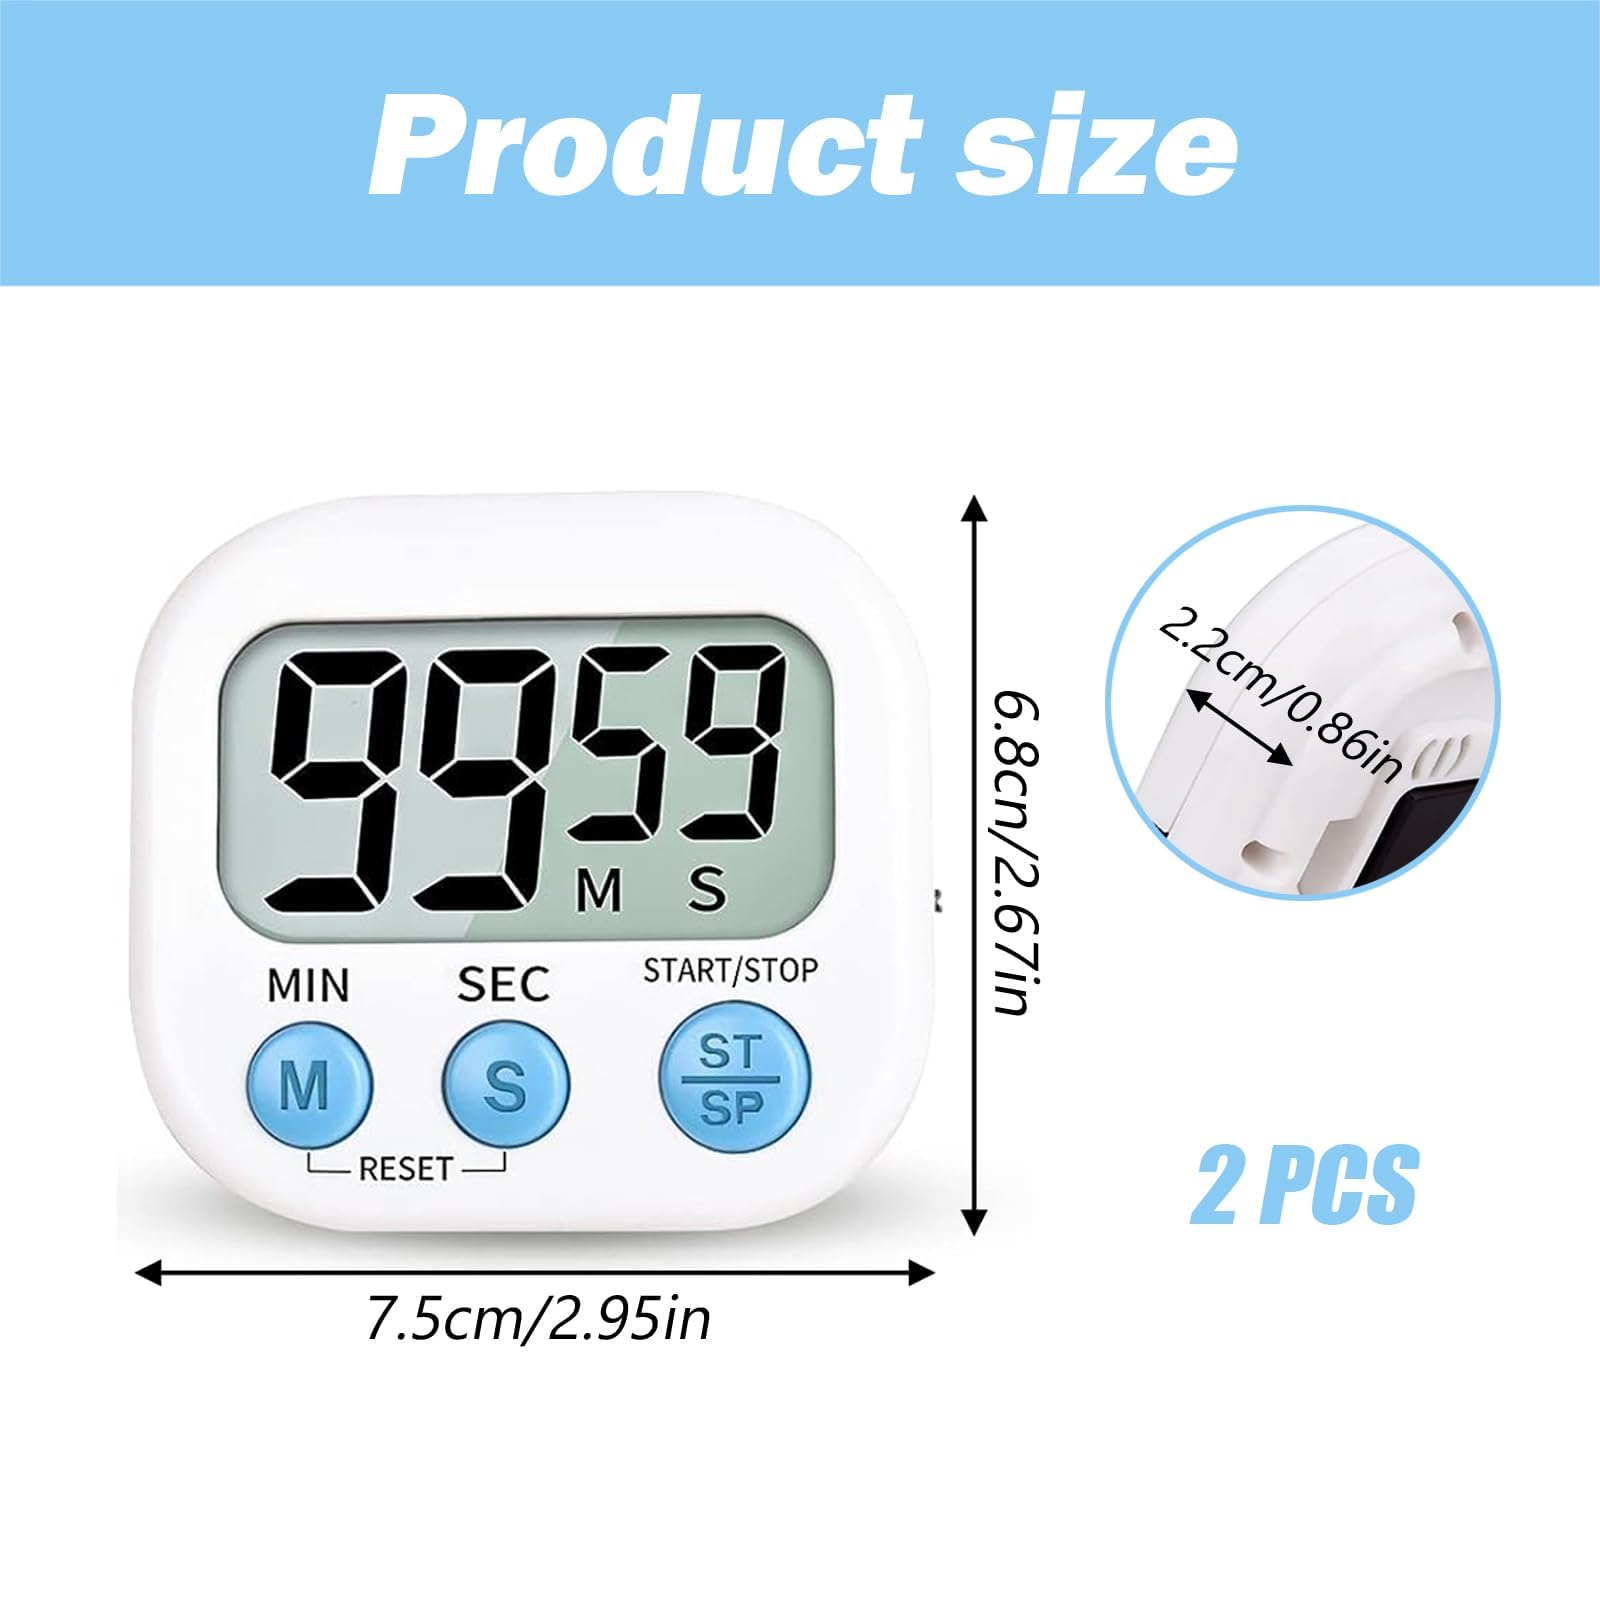 2 Pcs Timers for Cooking, Kitchen Timer, Digital Stopwatch Timer with On/Off Switch Clear Display Desk Timer for Baking Classroom Kitchen Study Exercise Training (White)